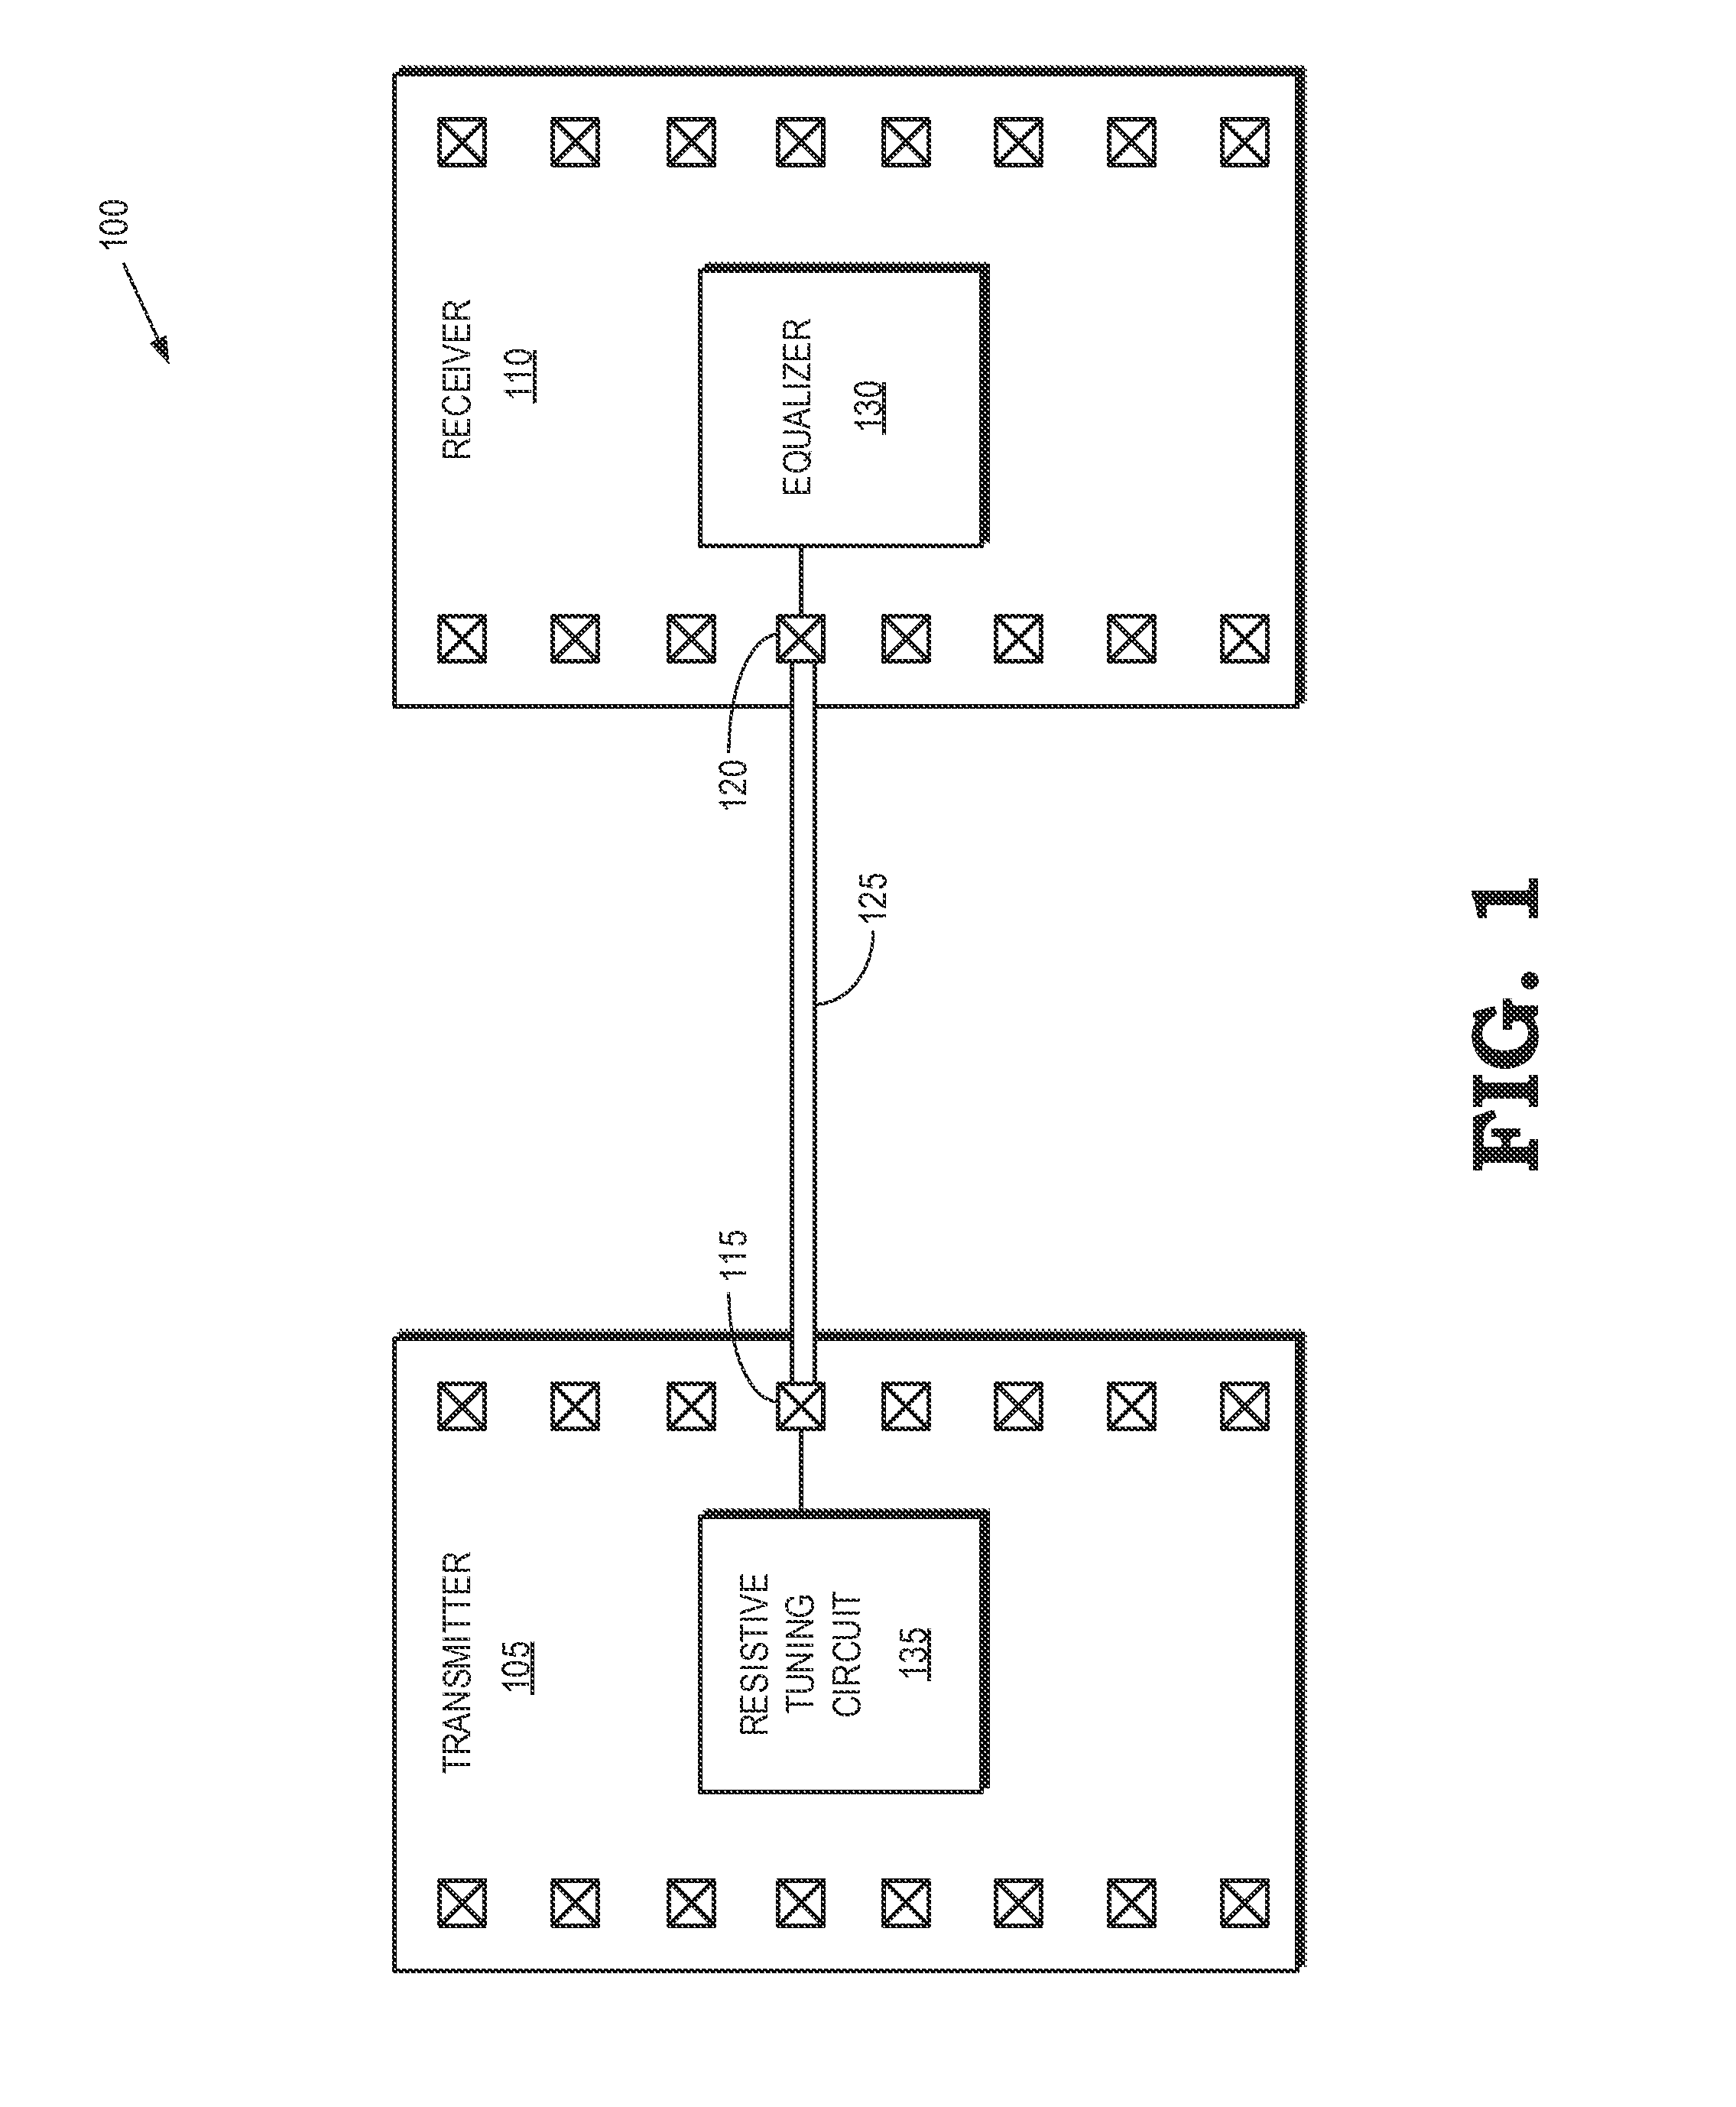 Variable series resistance termination for wireline serial link transistor